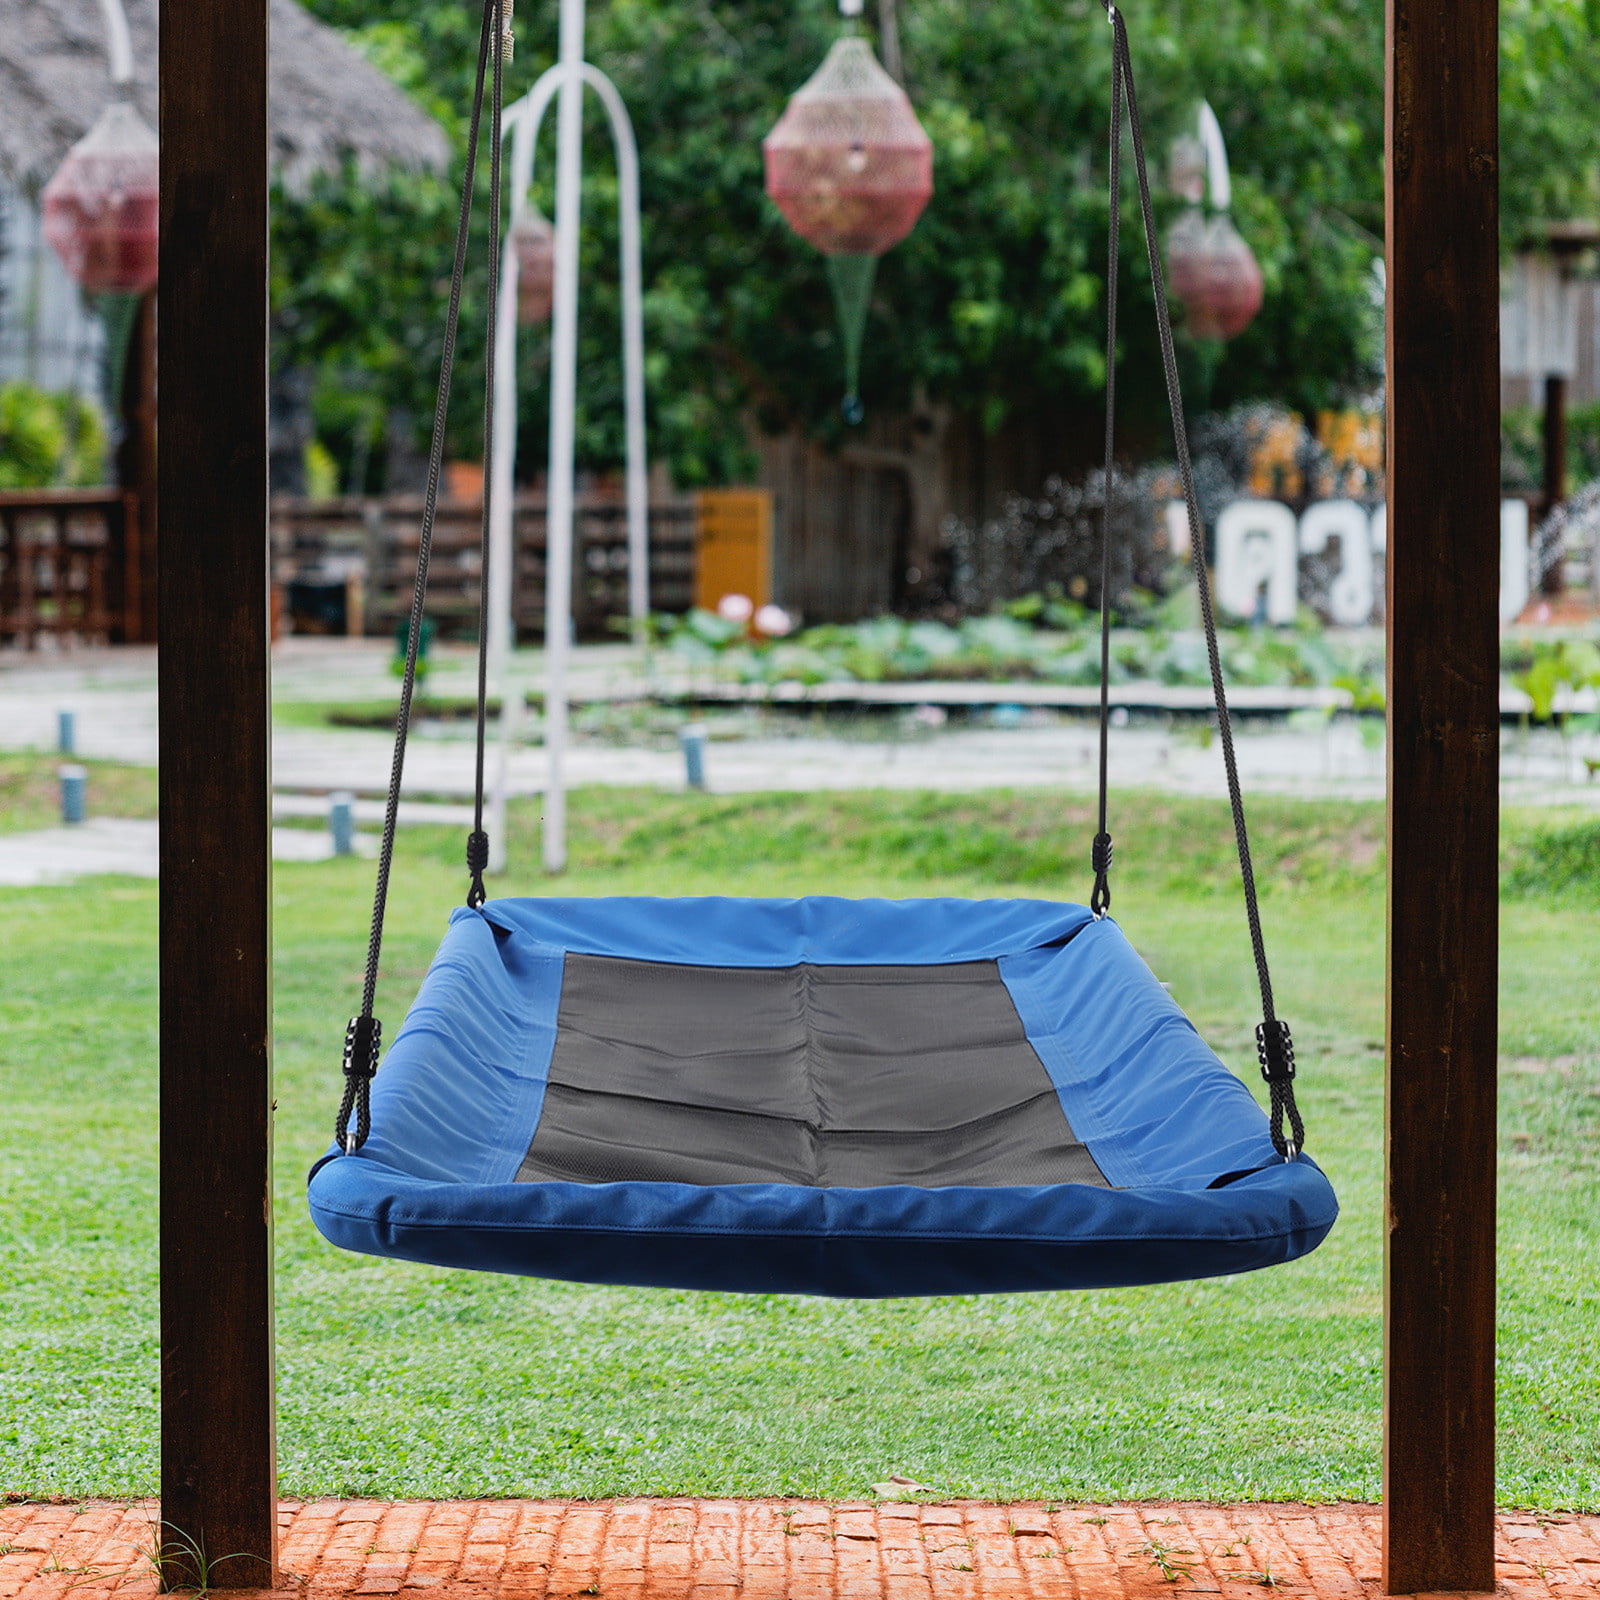 40" Large Kids Saucer Tree Swing Details about   Heavy Duty Premium Porch Swing Frame Set 